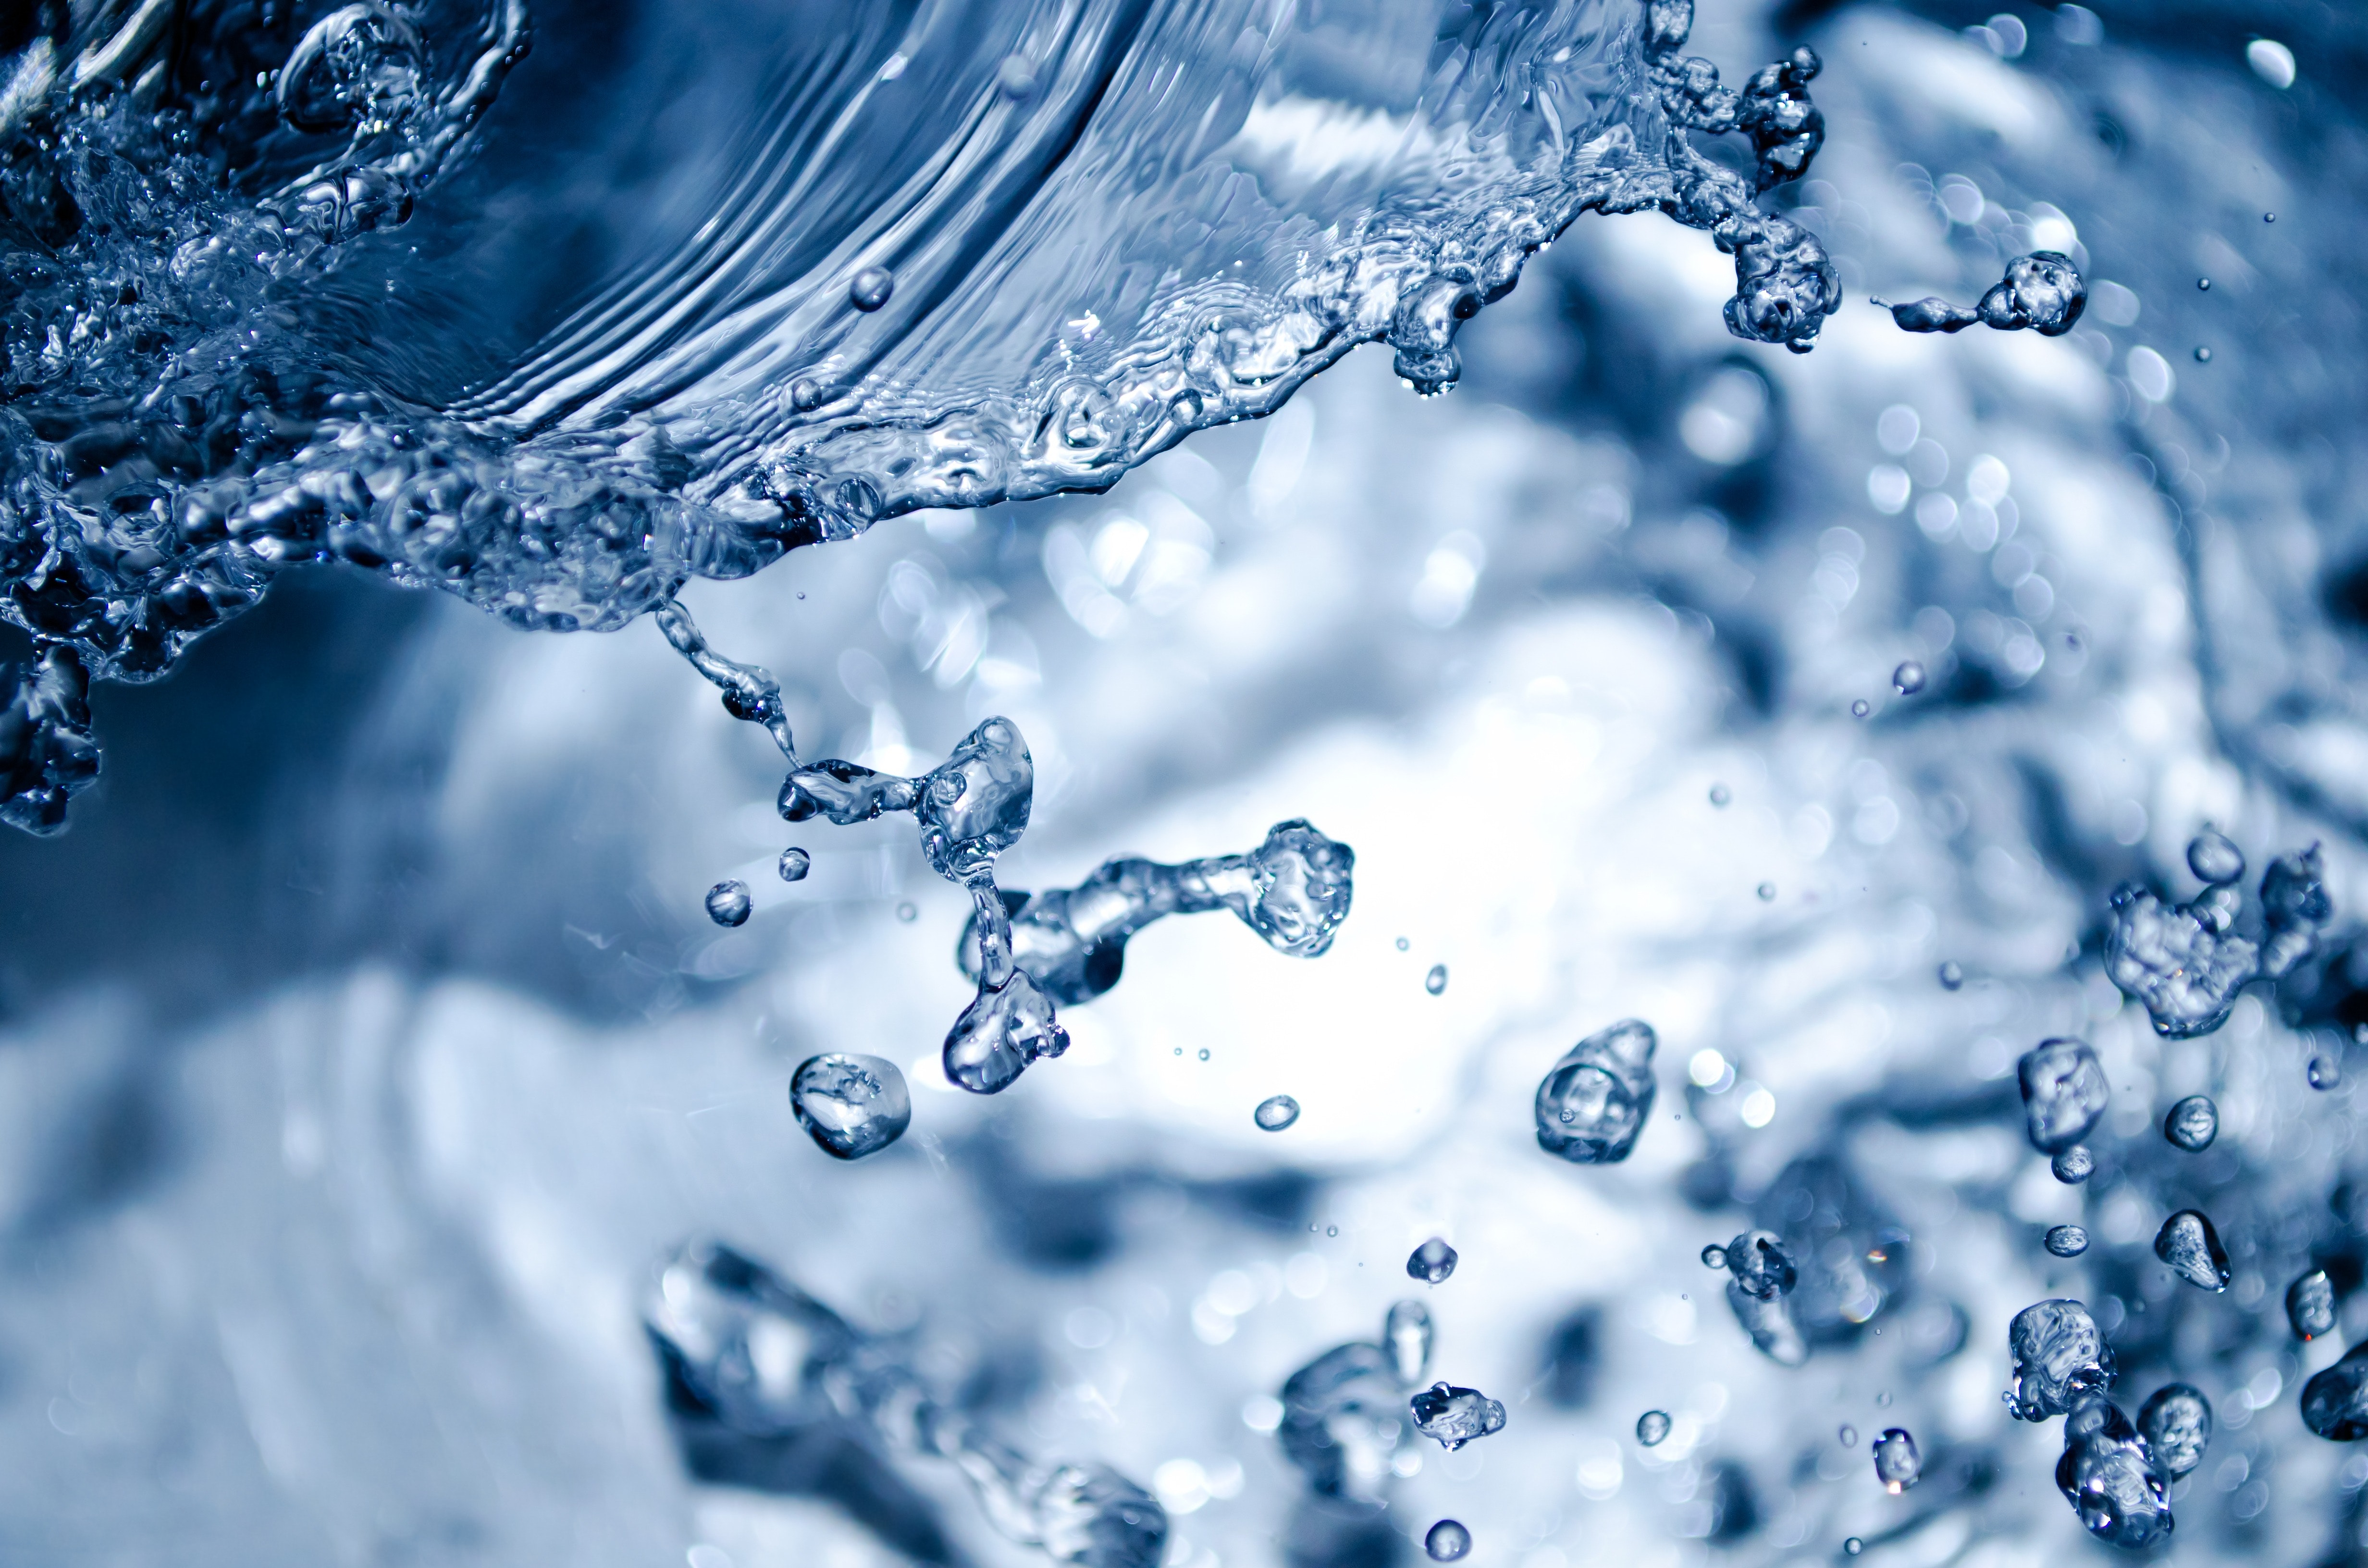 Water Close Up Photography · Free Stock Photo